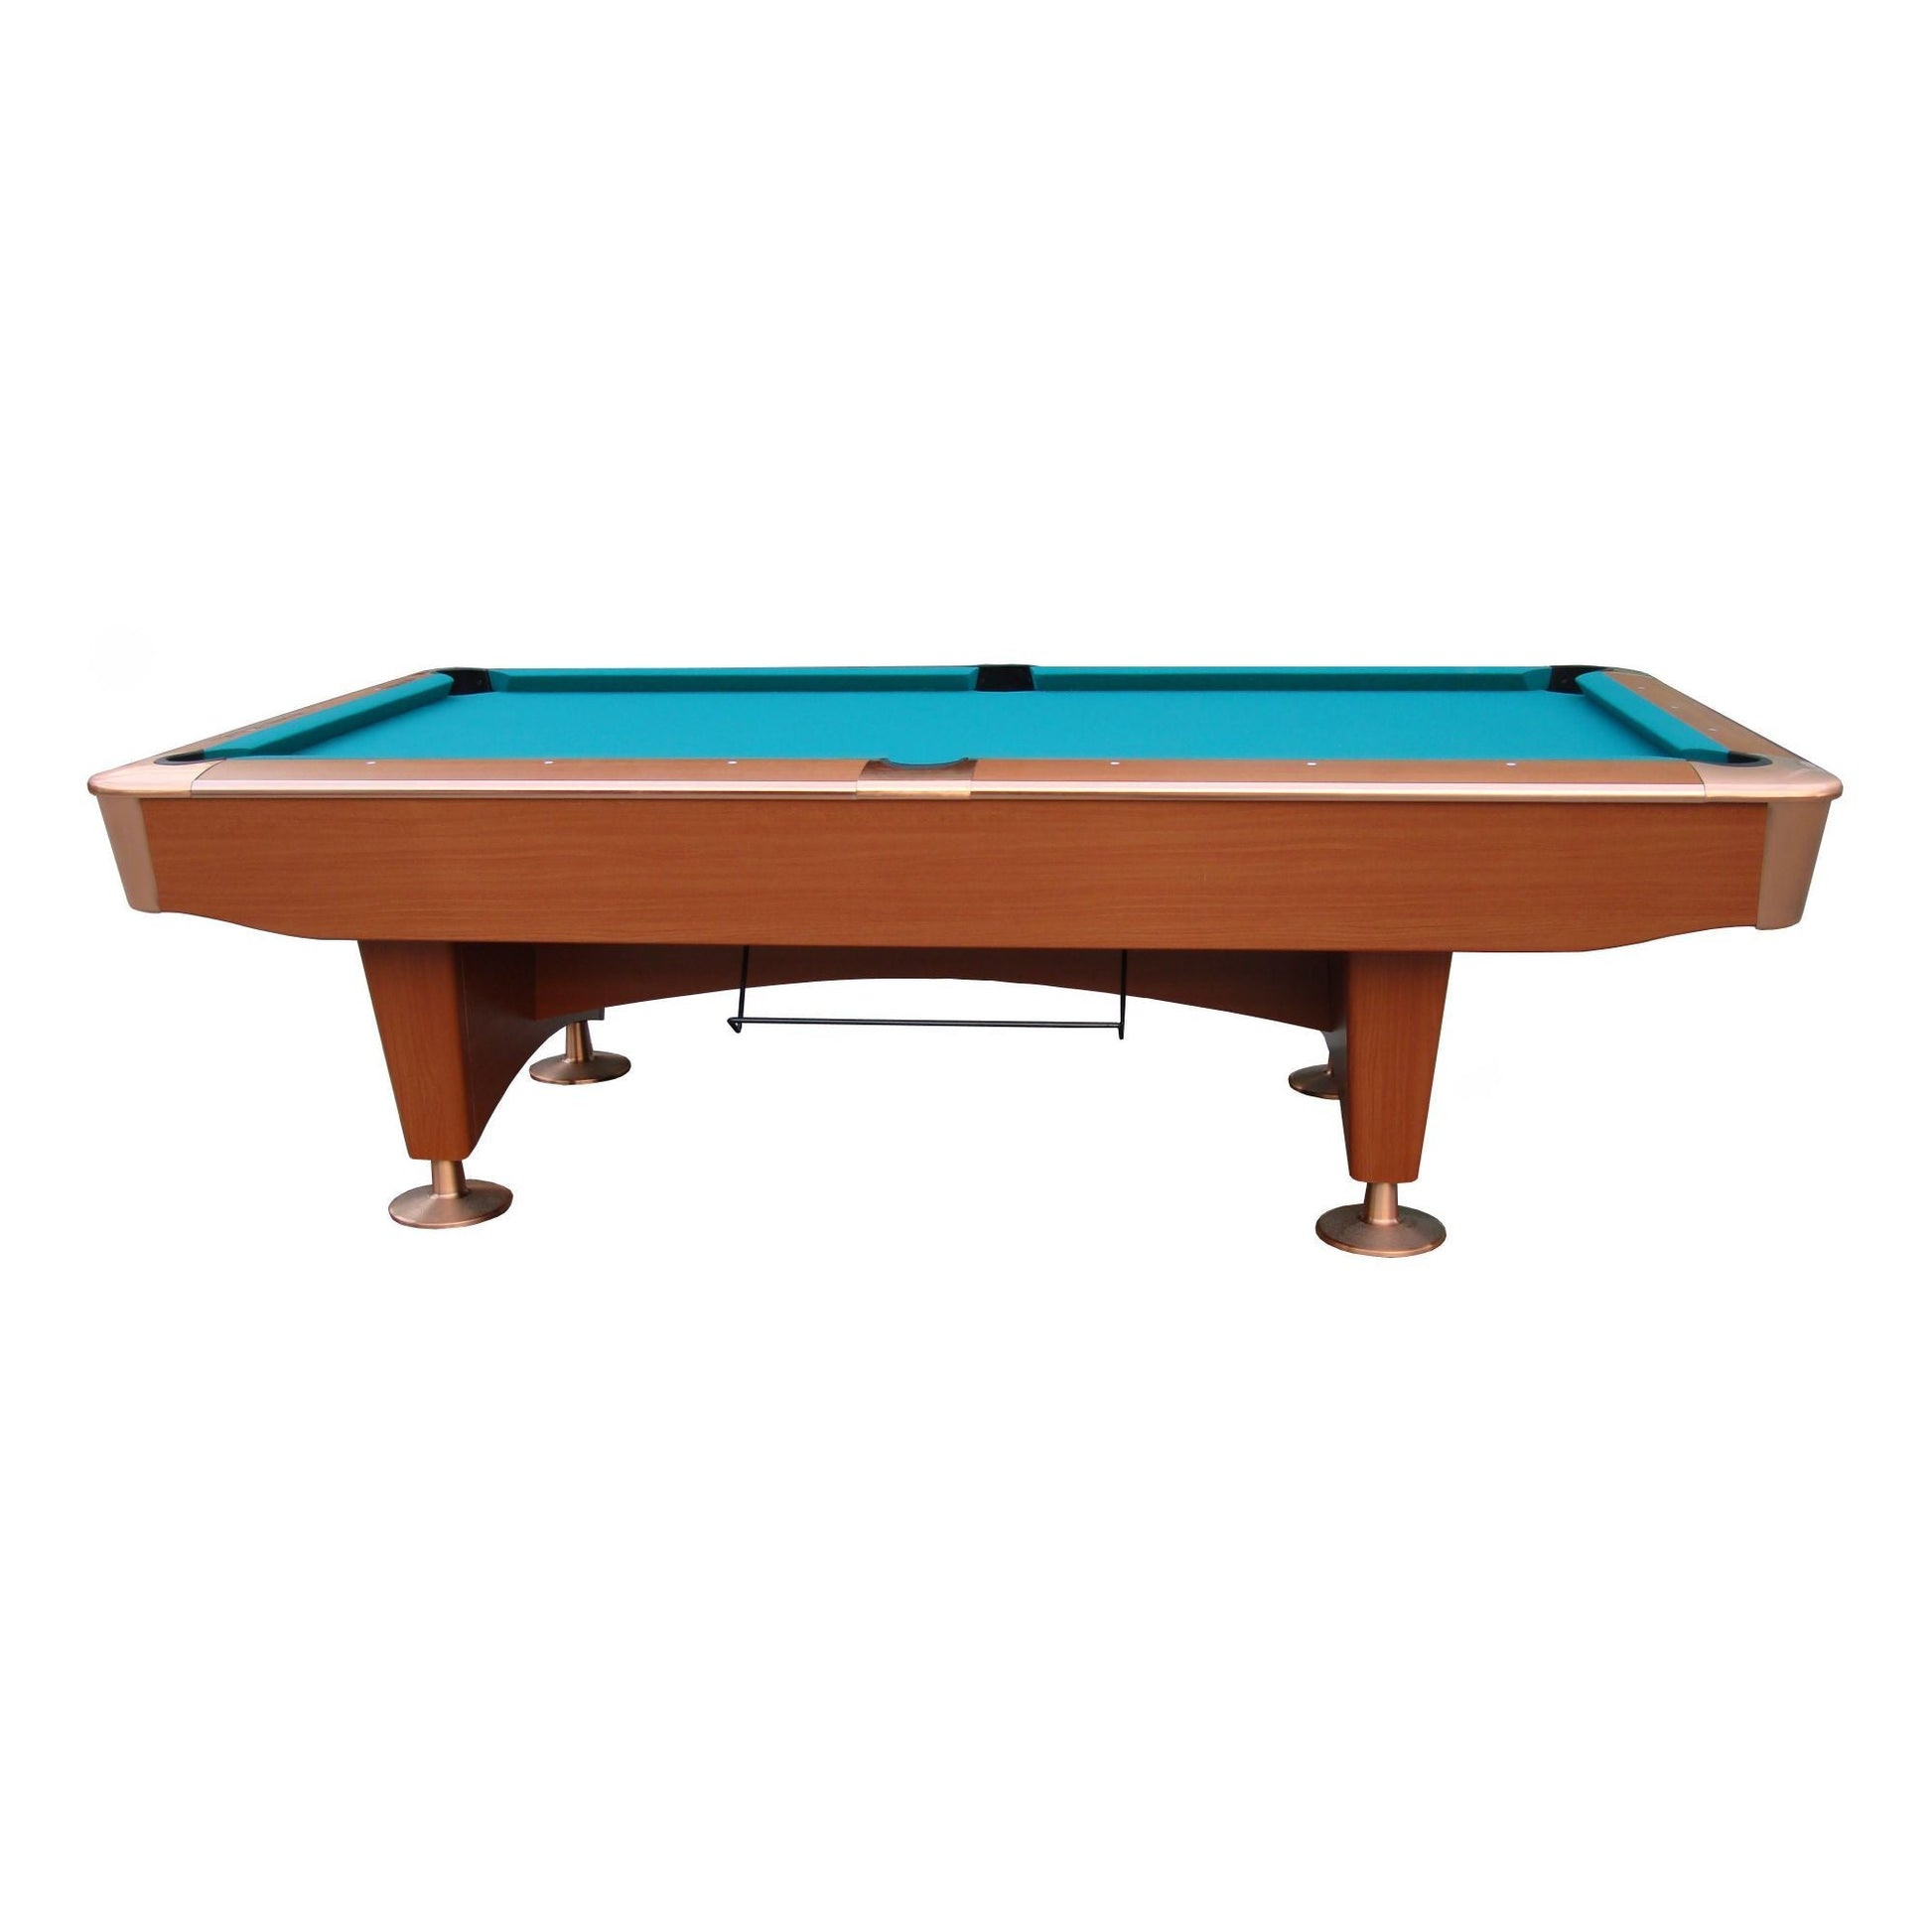 Playcraft Southport Slate Pool Table with Ball Return - Upper Livin